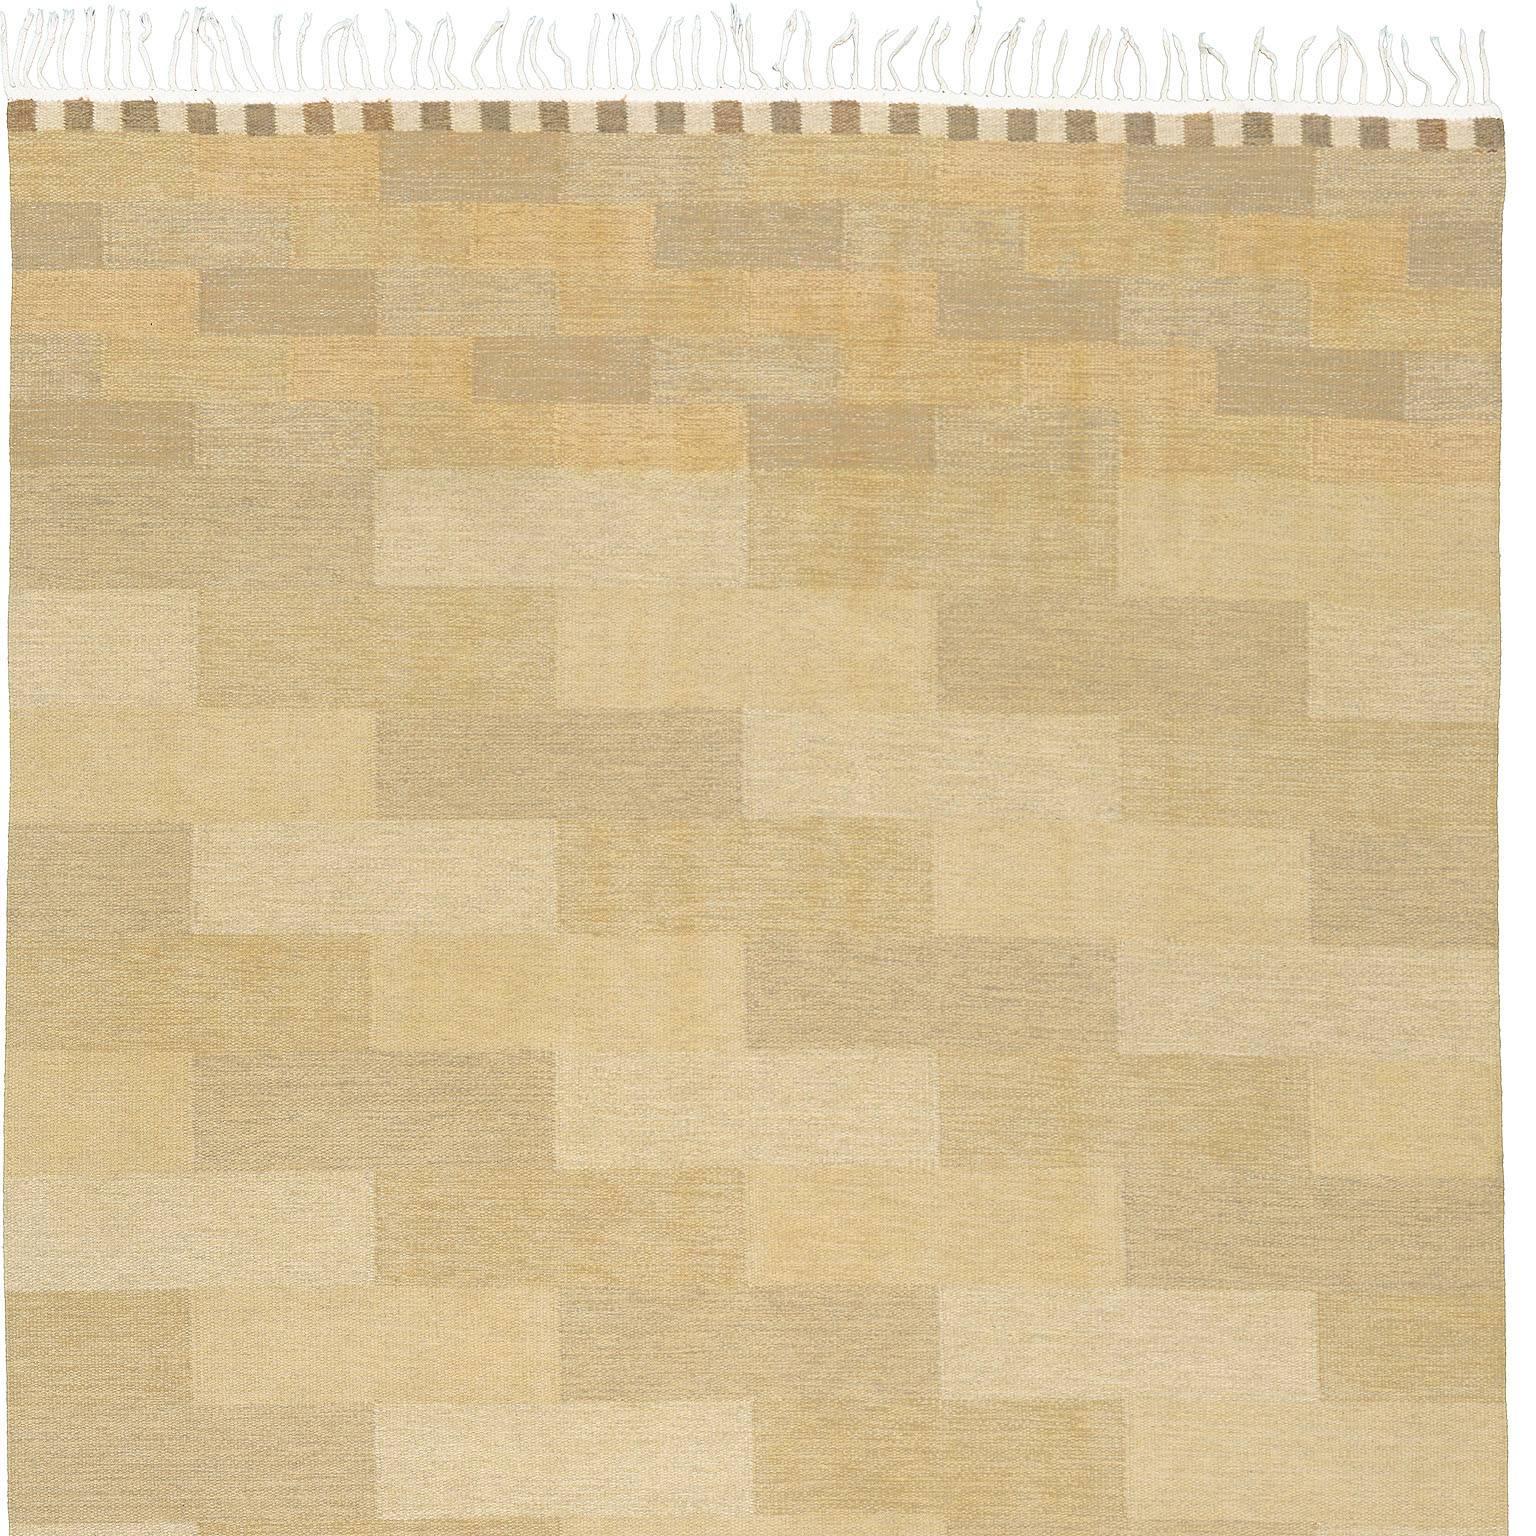 Late 20th Century Swedish Flat-Weave Carpet In Good Condition For Sale In New York, NY